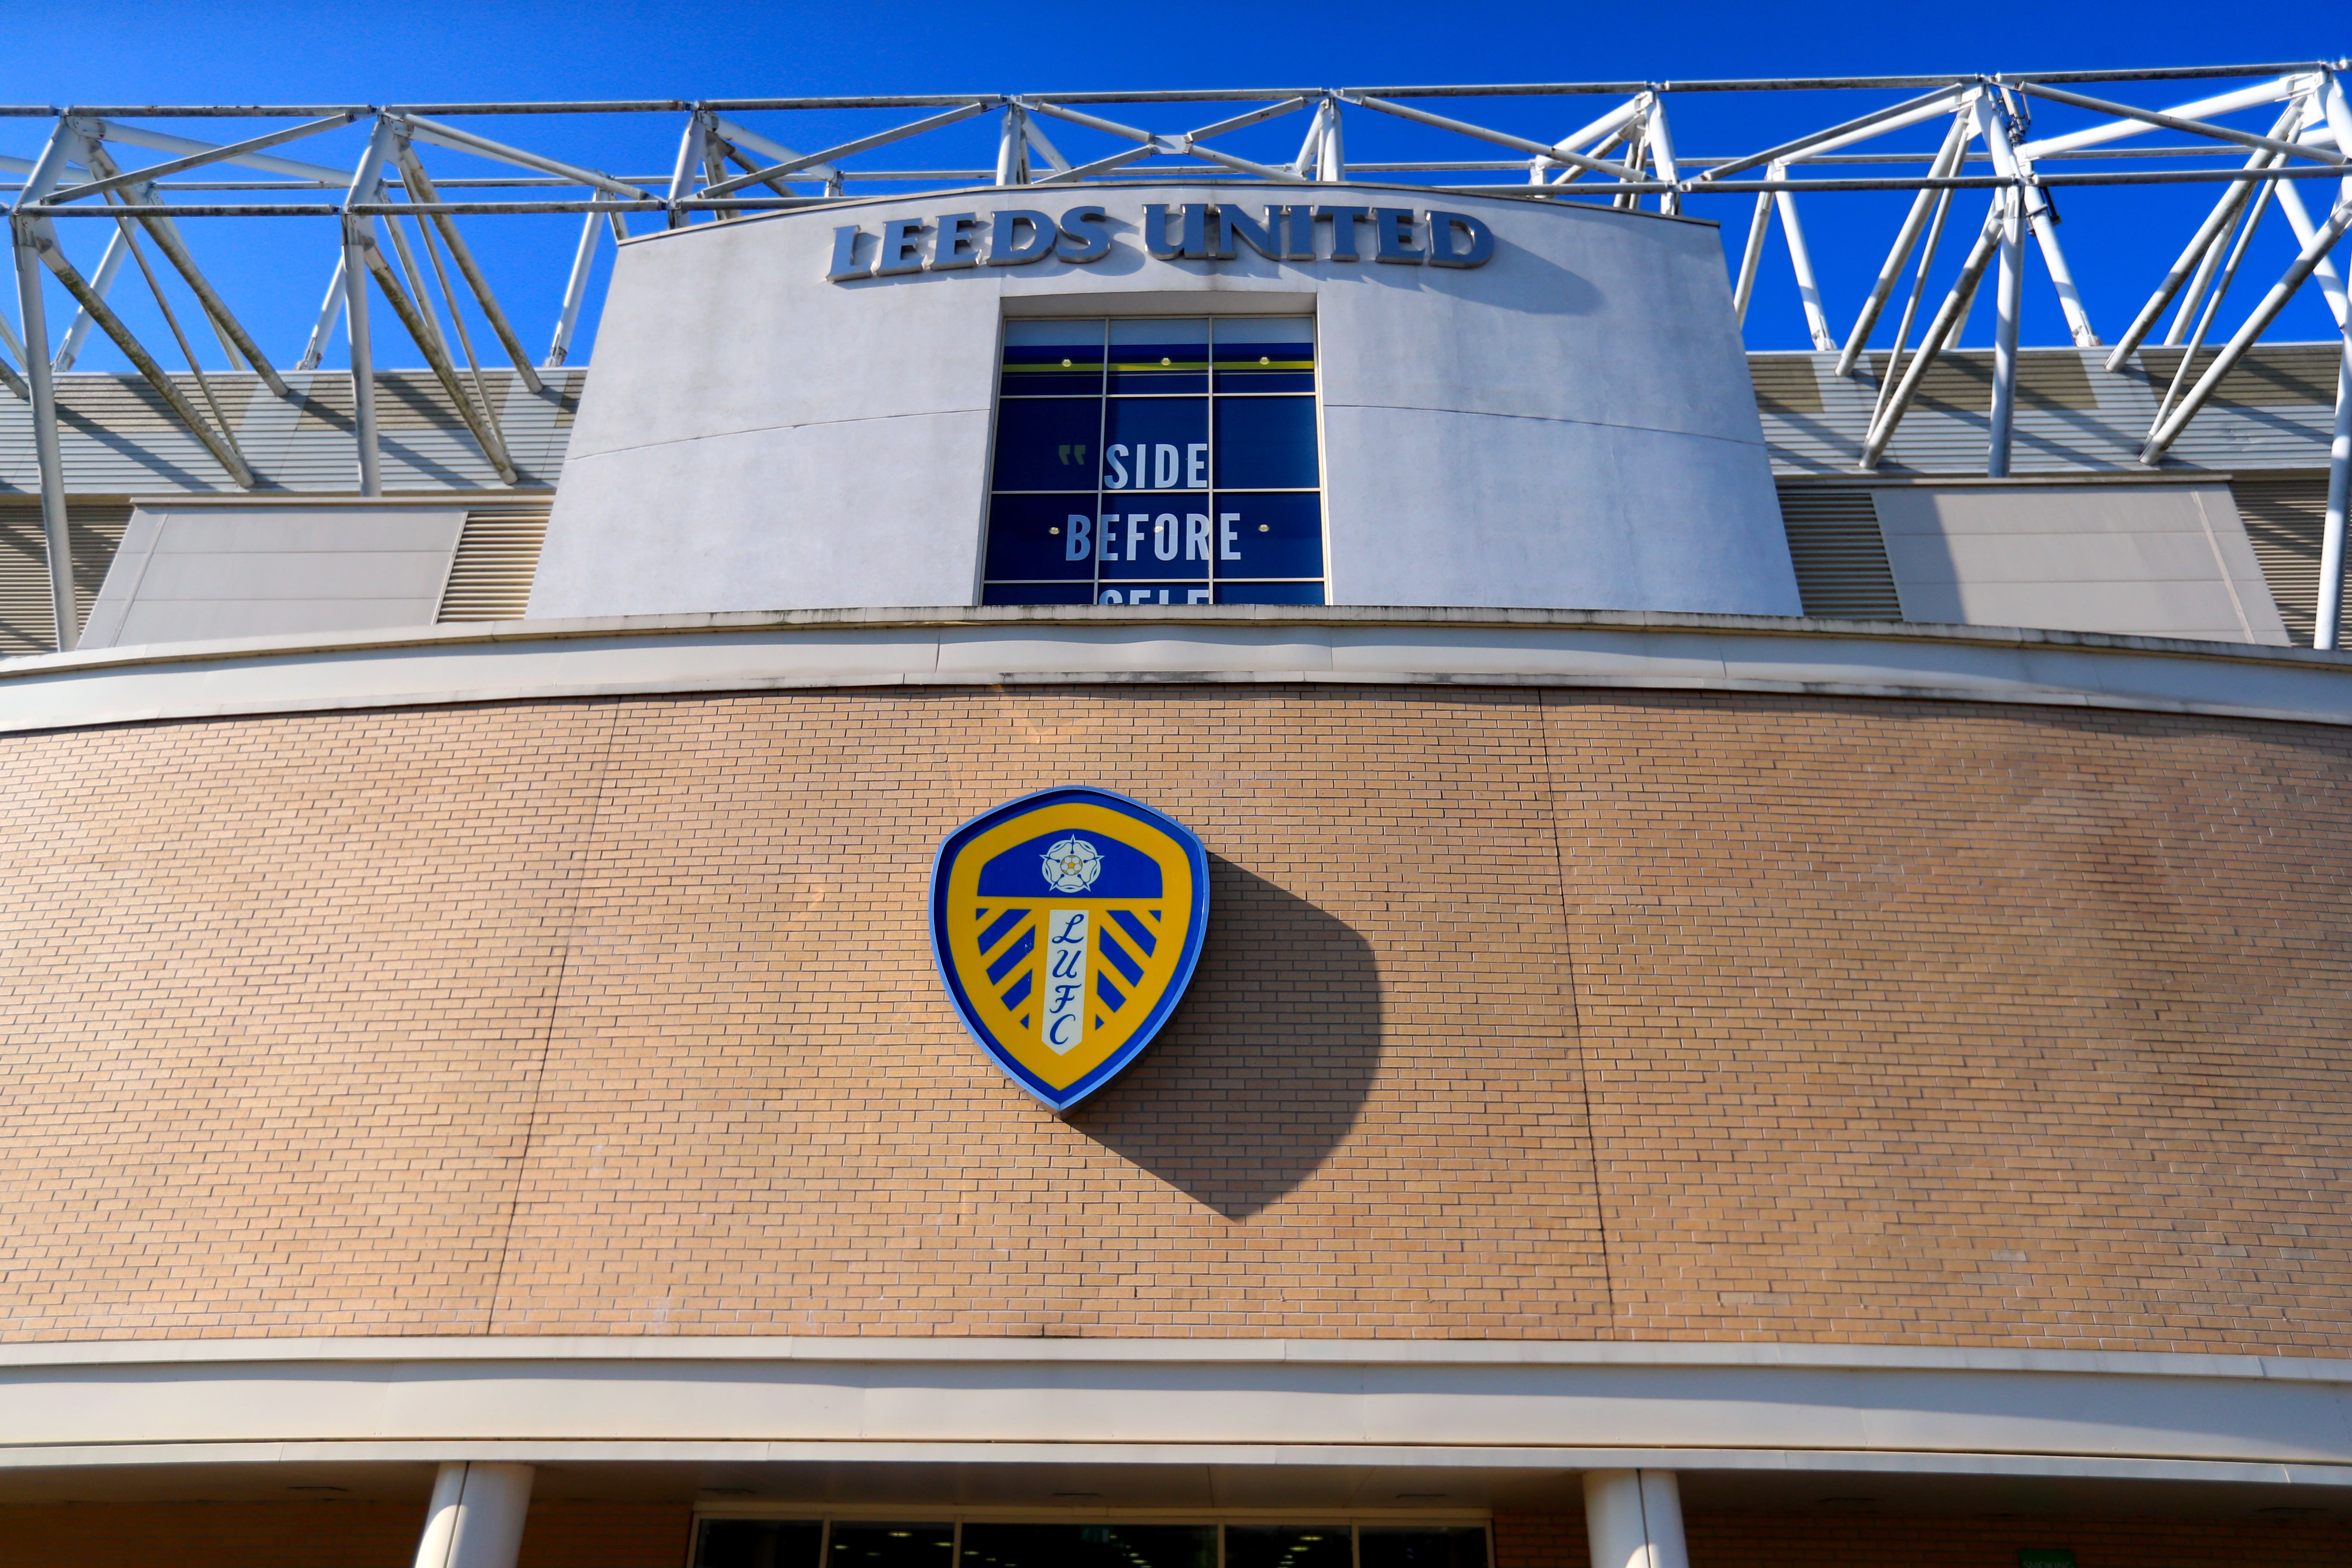 Elland Road has been closed until further notice as police investigate a security threat